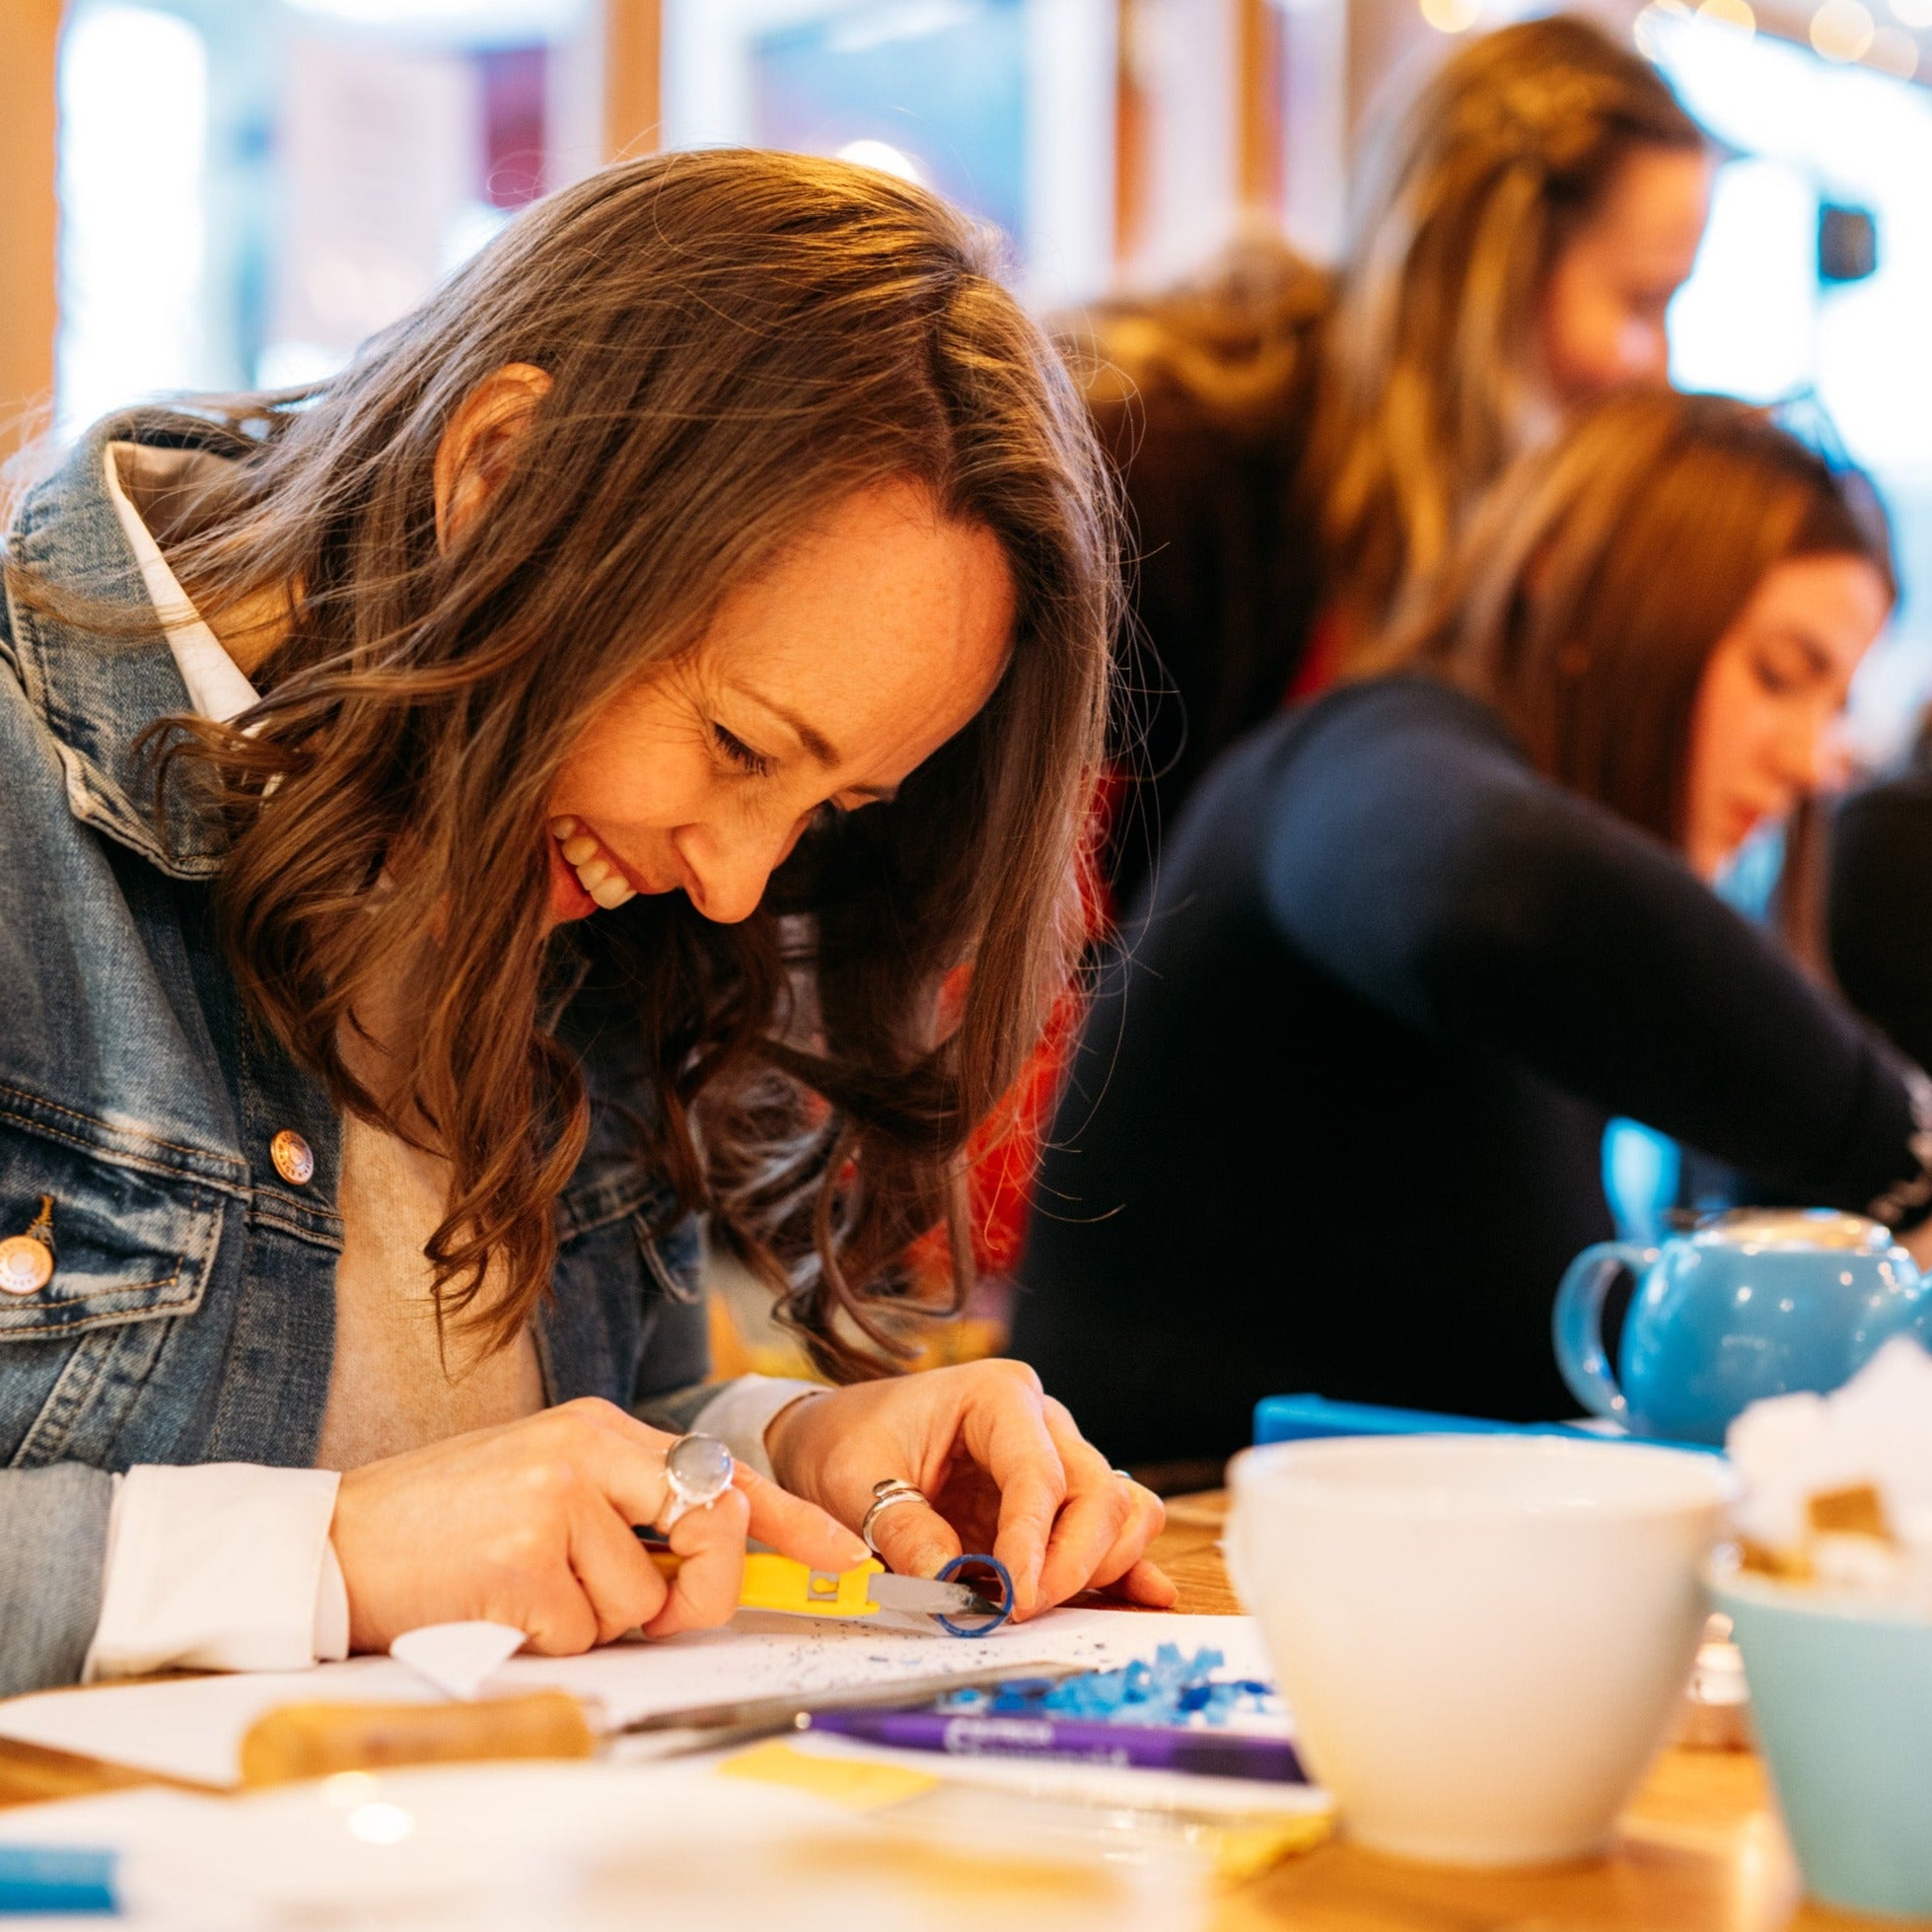 In this workshop you will learn how to create your own bespoke pendant through the art of lost wax casting. Explore mindfulness through creativity in a safe space where anything is possible.